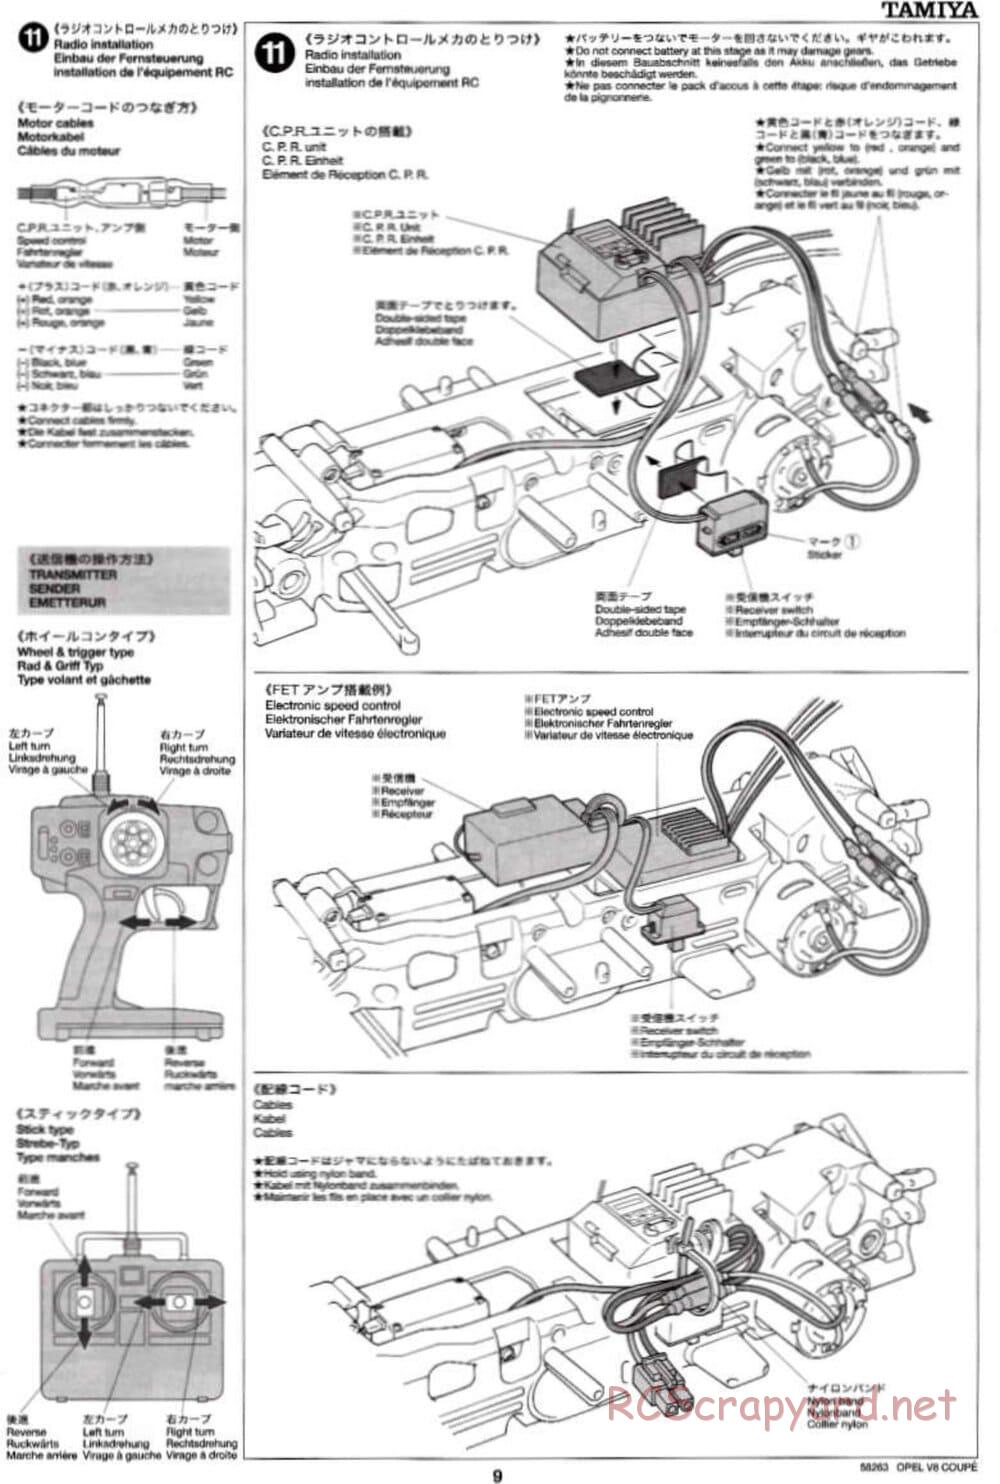 Tamiya - Opel V8 Coupe - TL-01 Chassis - Manual - Page 9